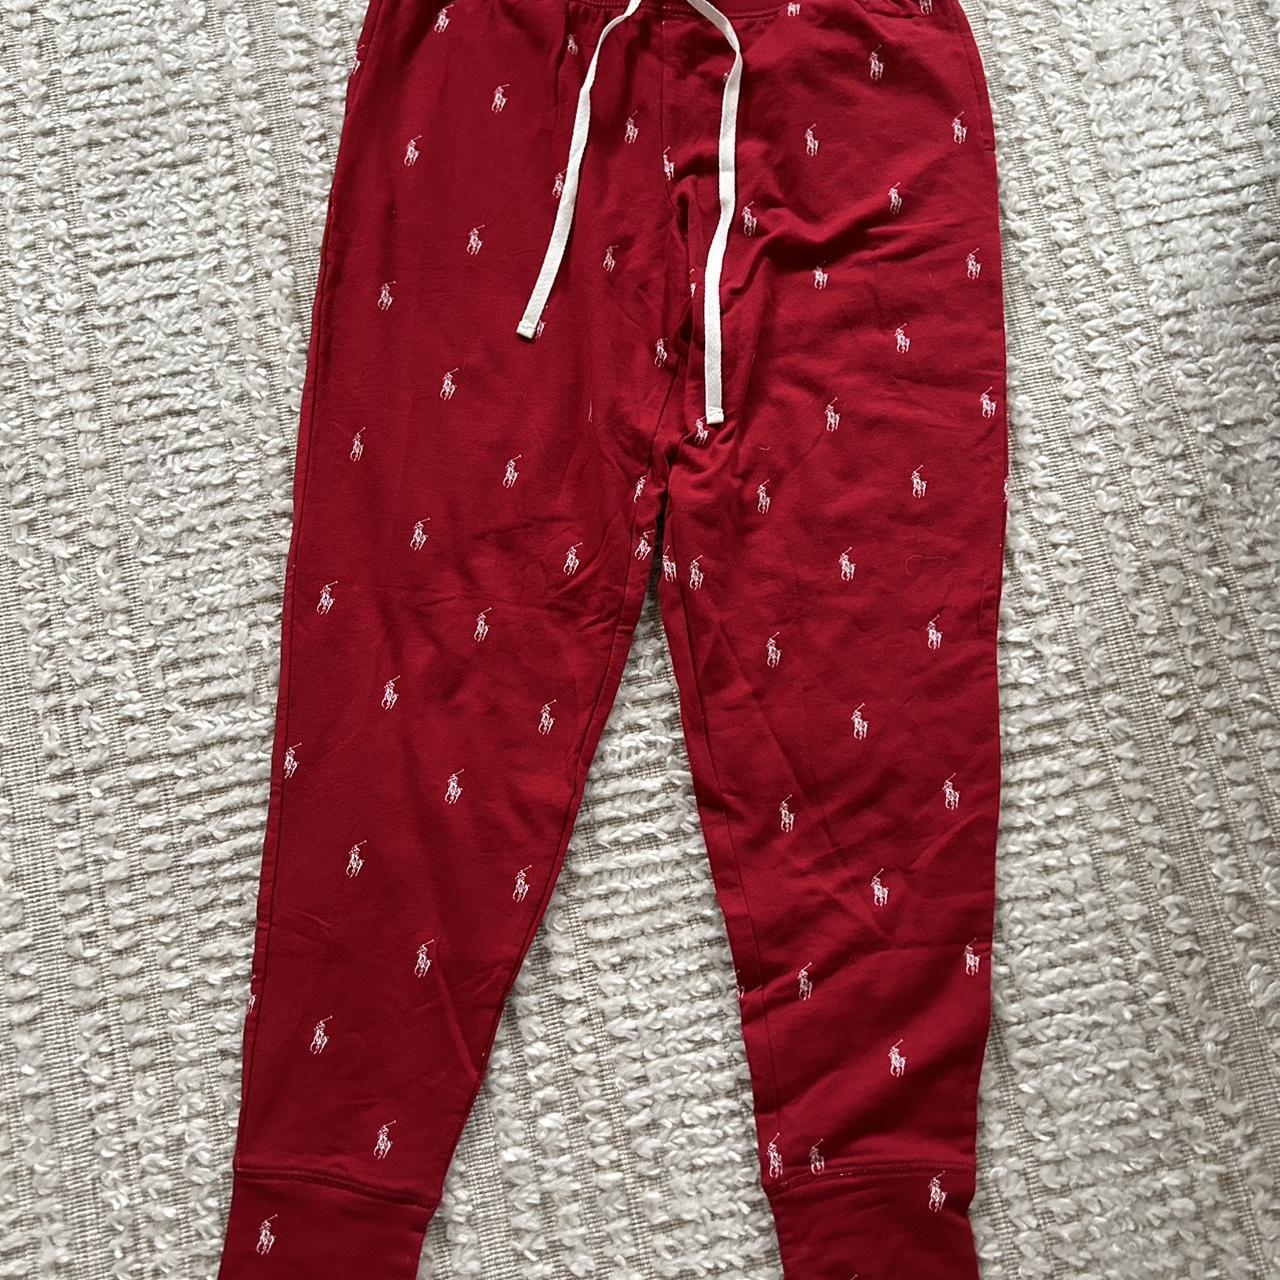 Polo Ralph Lauren Women's Red and White Joggers-tracksuits | Depop